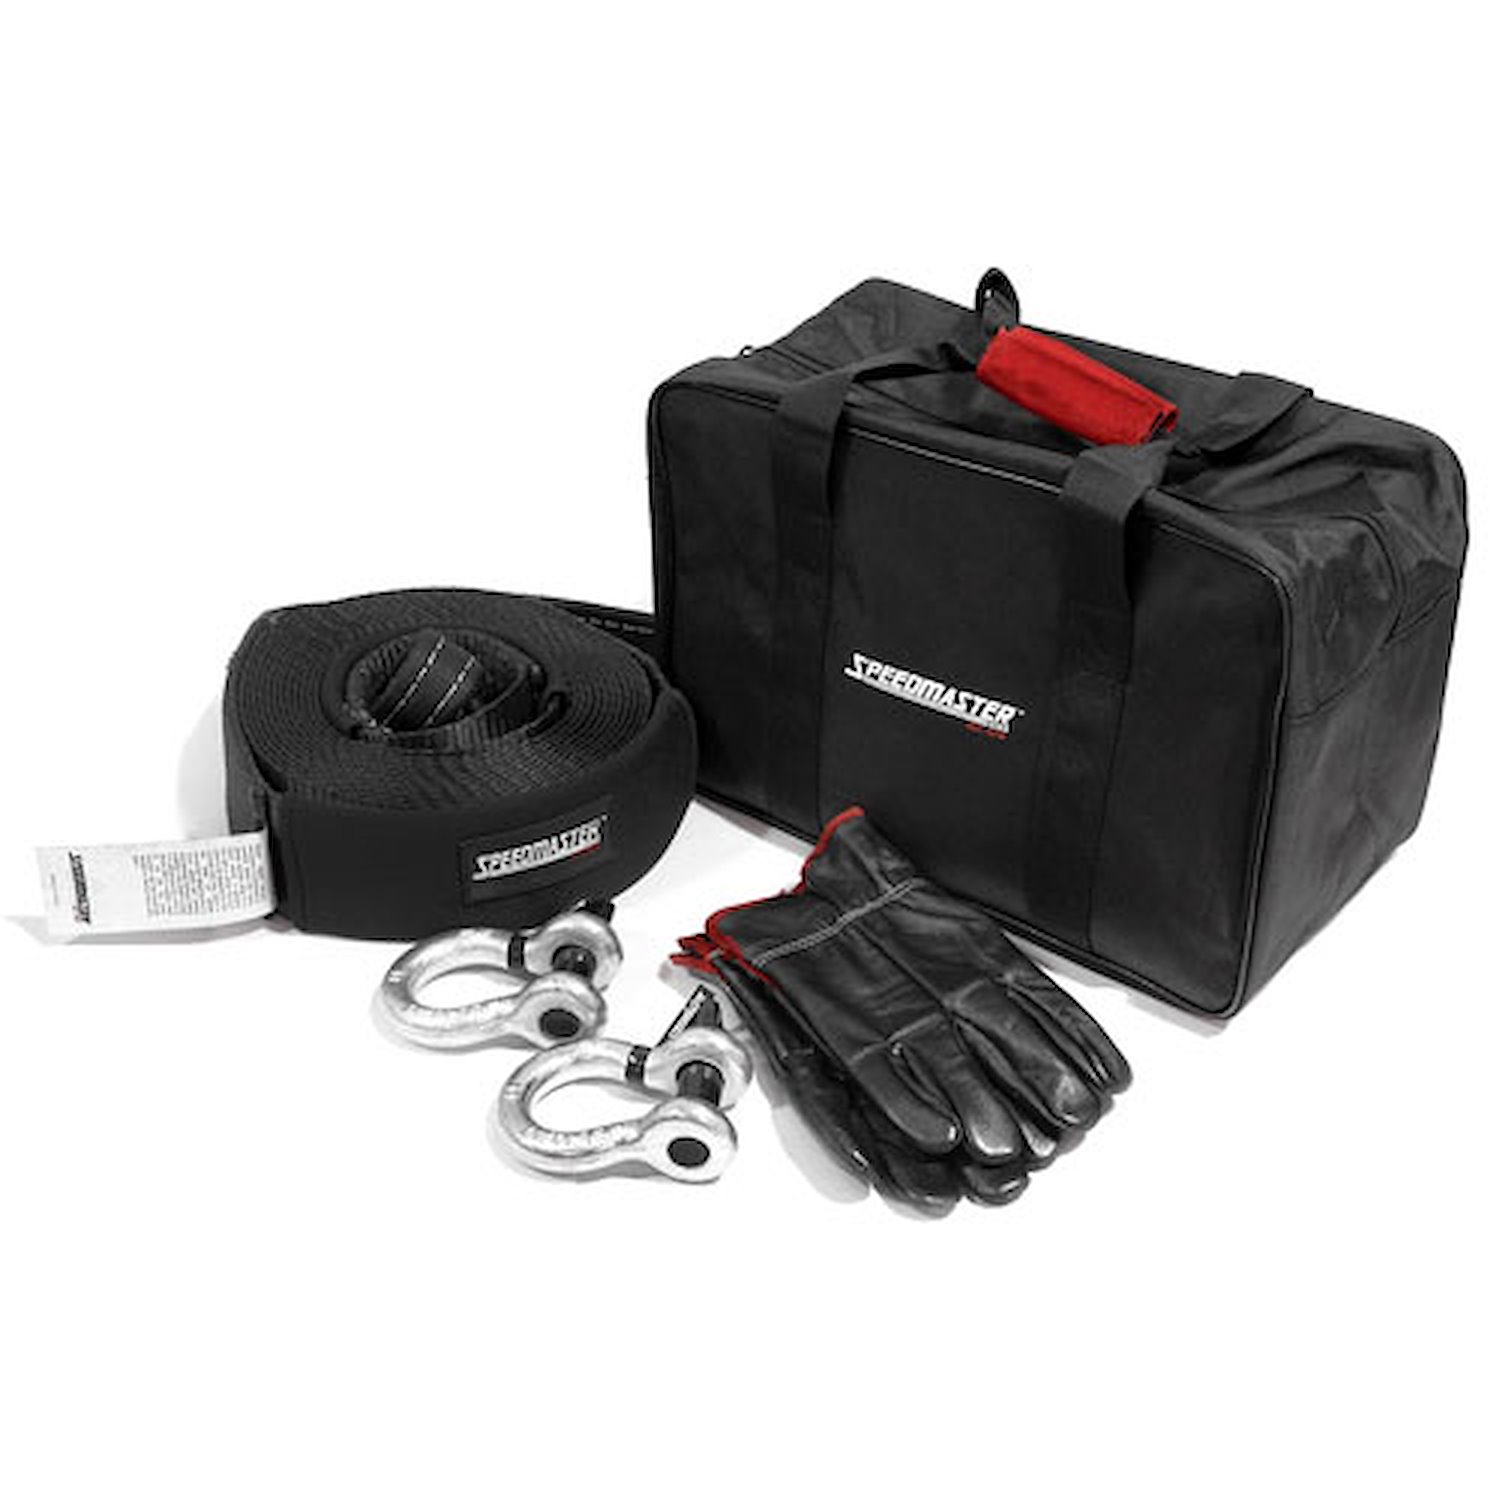 Standard 4WD Winch Recovery Kit 5-Piece Kit Includes: Tow Strap